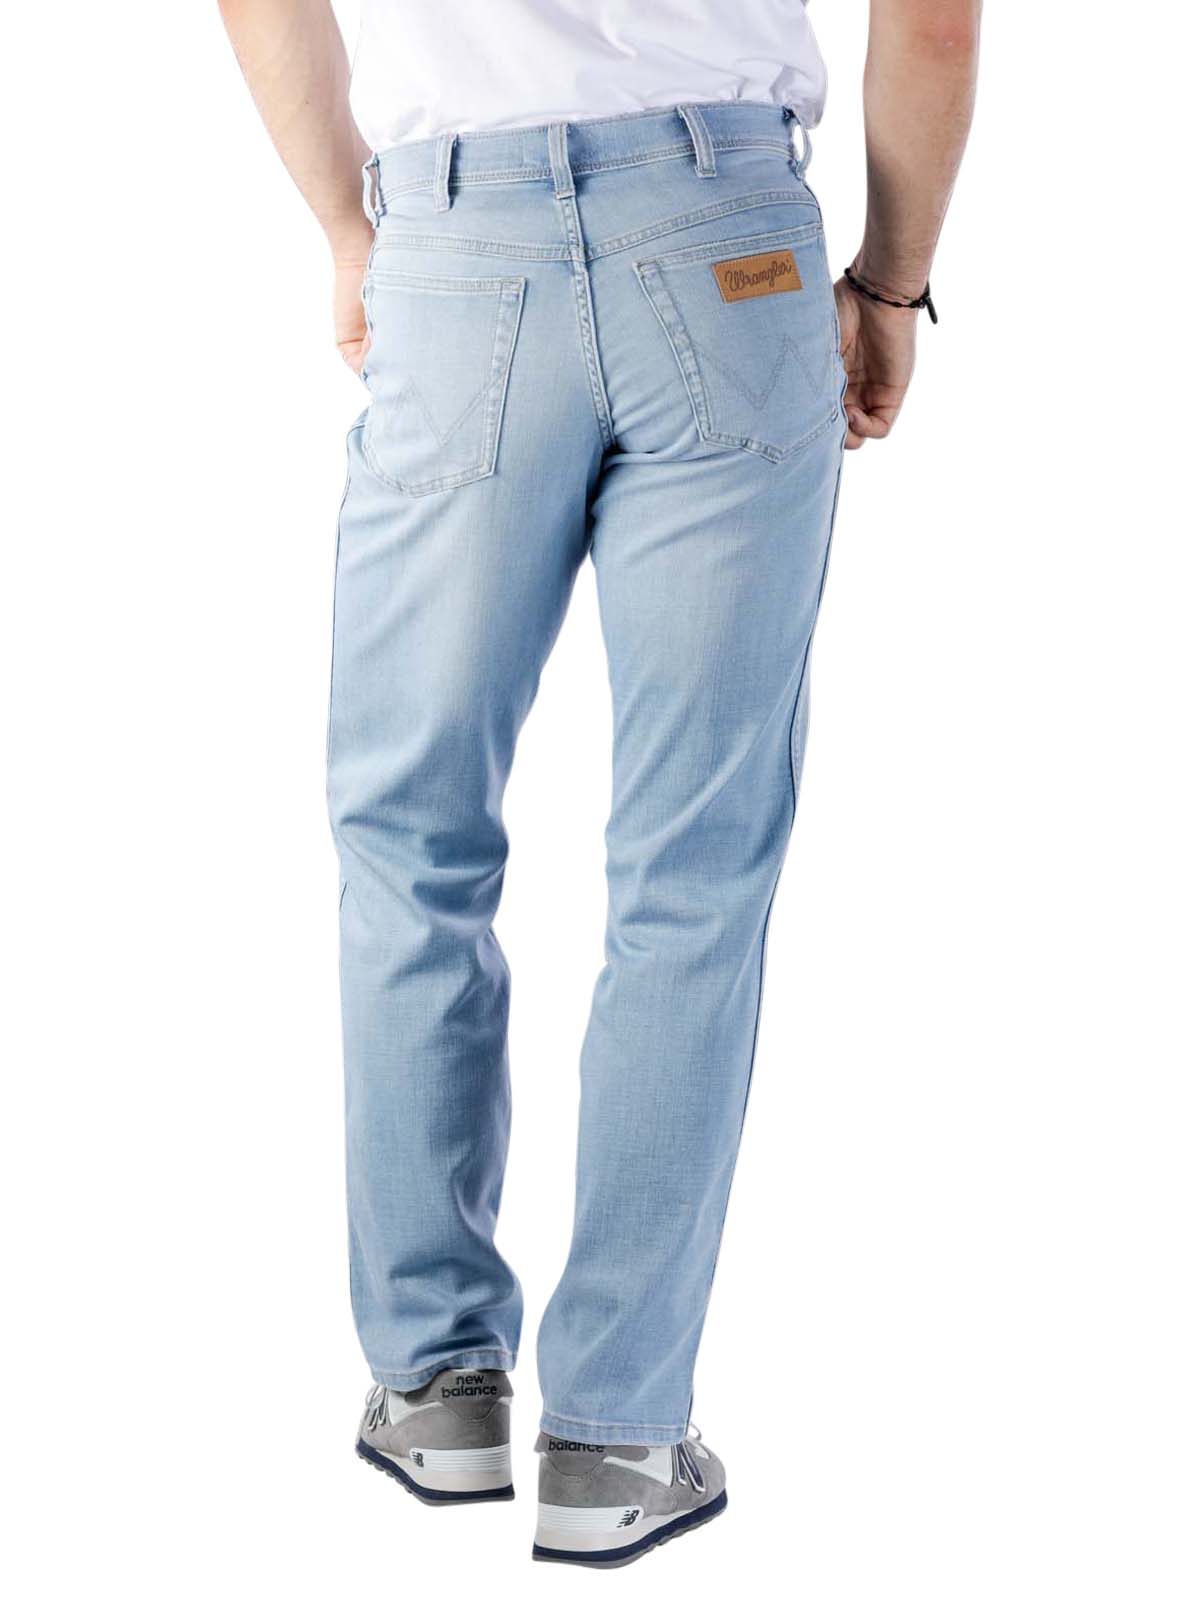 Wrangler Texas Stretch Jeans flingwing Wrangler Men's Jeans | Free Shipping  on  - SIMPLY LOOK GOOD